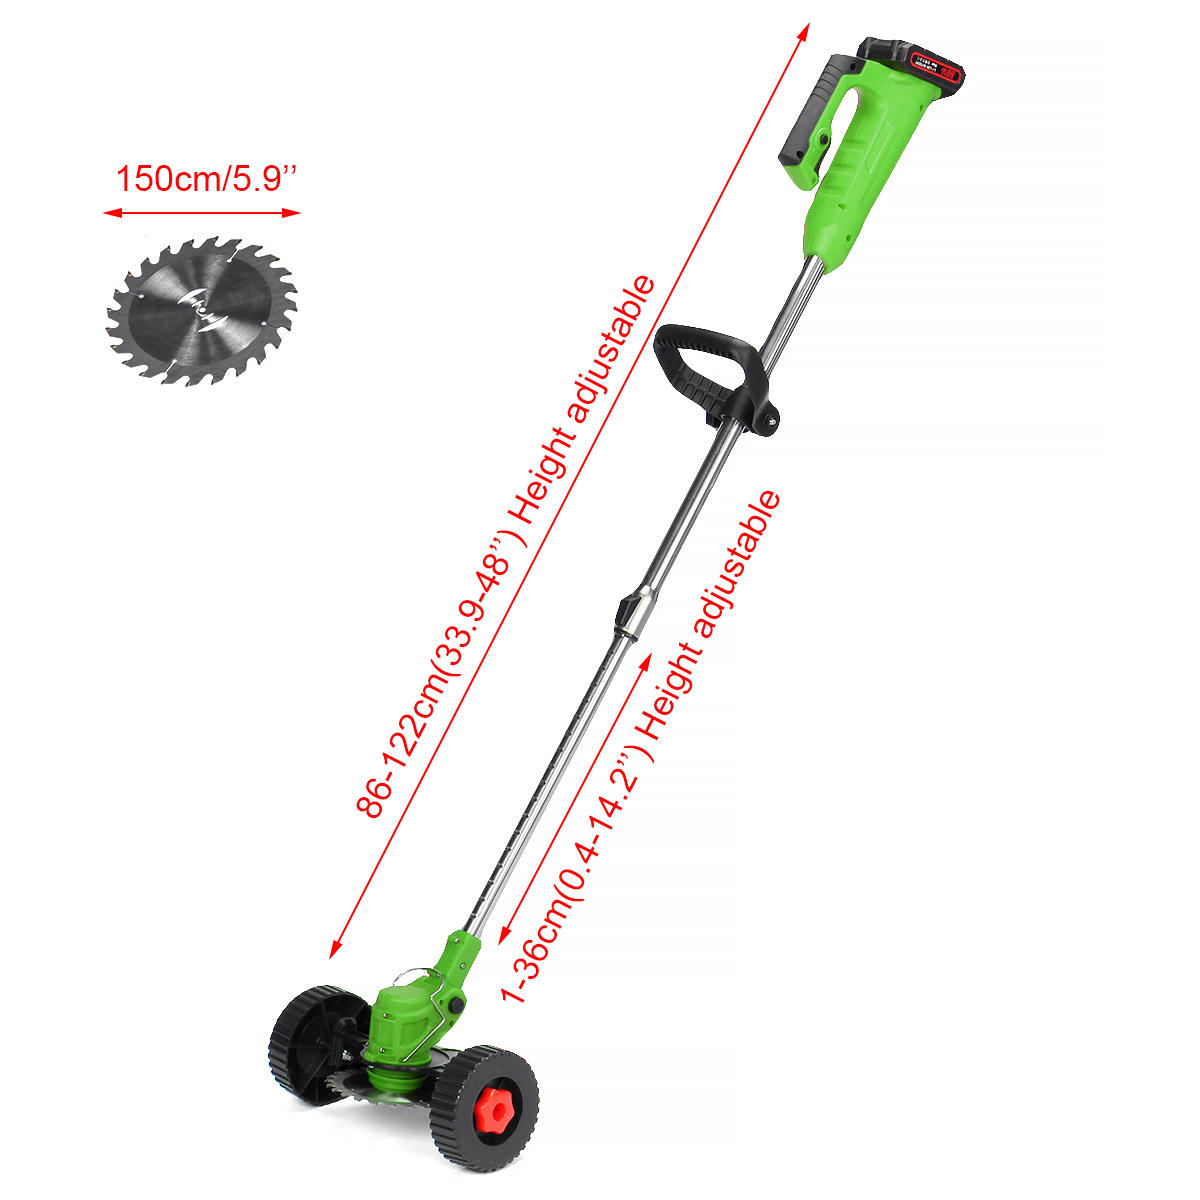 1500W Cordless Electric Grass Trimmer Weed Eater Edger Lawn Mower W/ 1/2 Battery